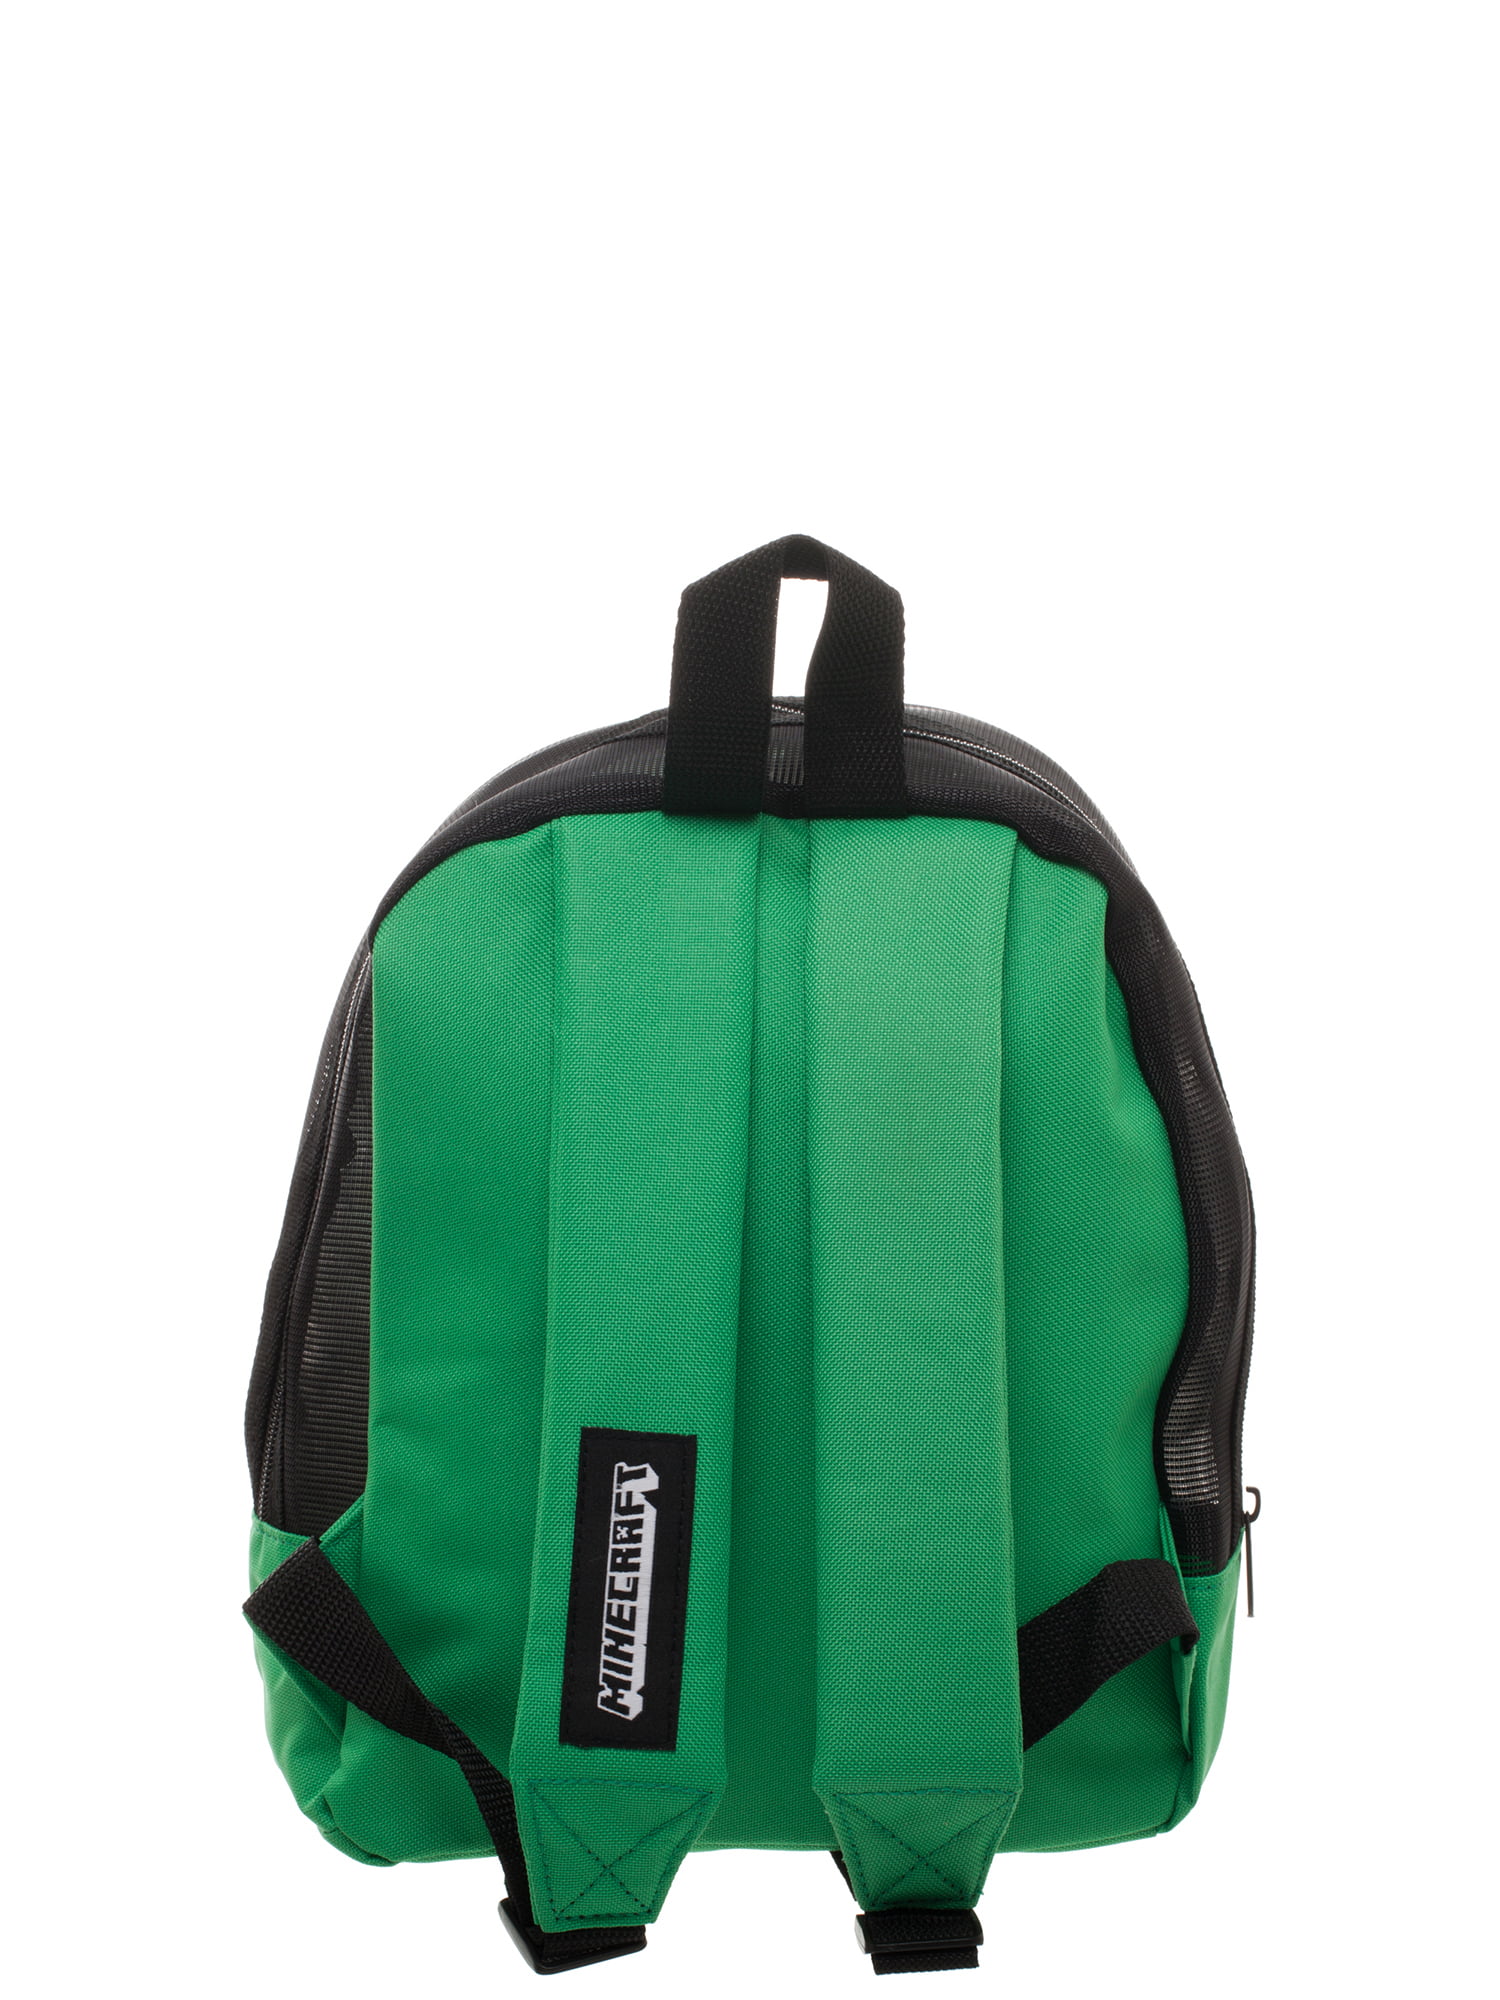 Minecraft Backpack Small 12